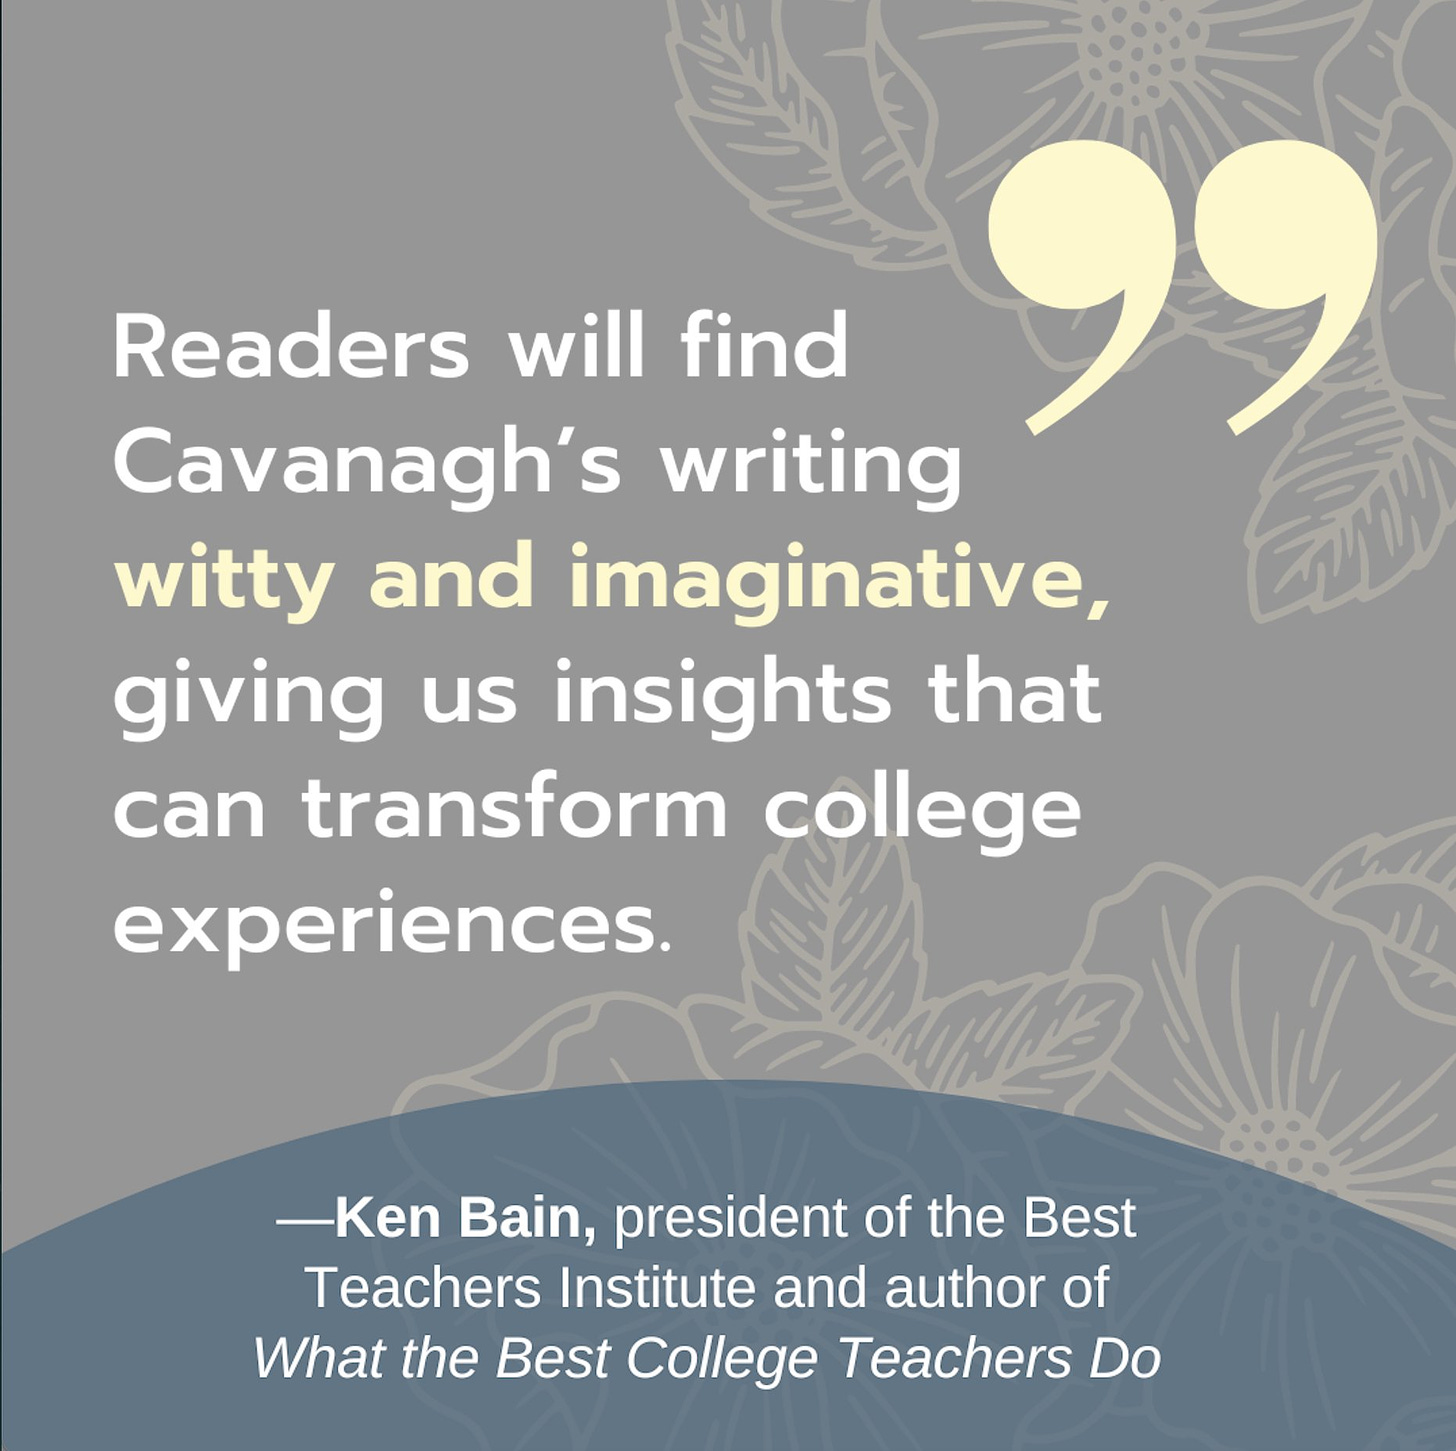 Readers will find Cavanagh's writing witty and imaginative, giving us insights that can college experiences. - Ken Bain, president of the Best Teachers Institute and author of What the Best College Teachers Do